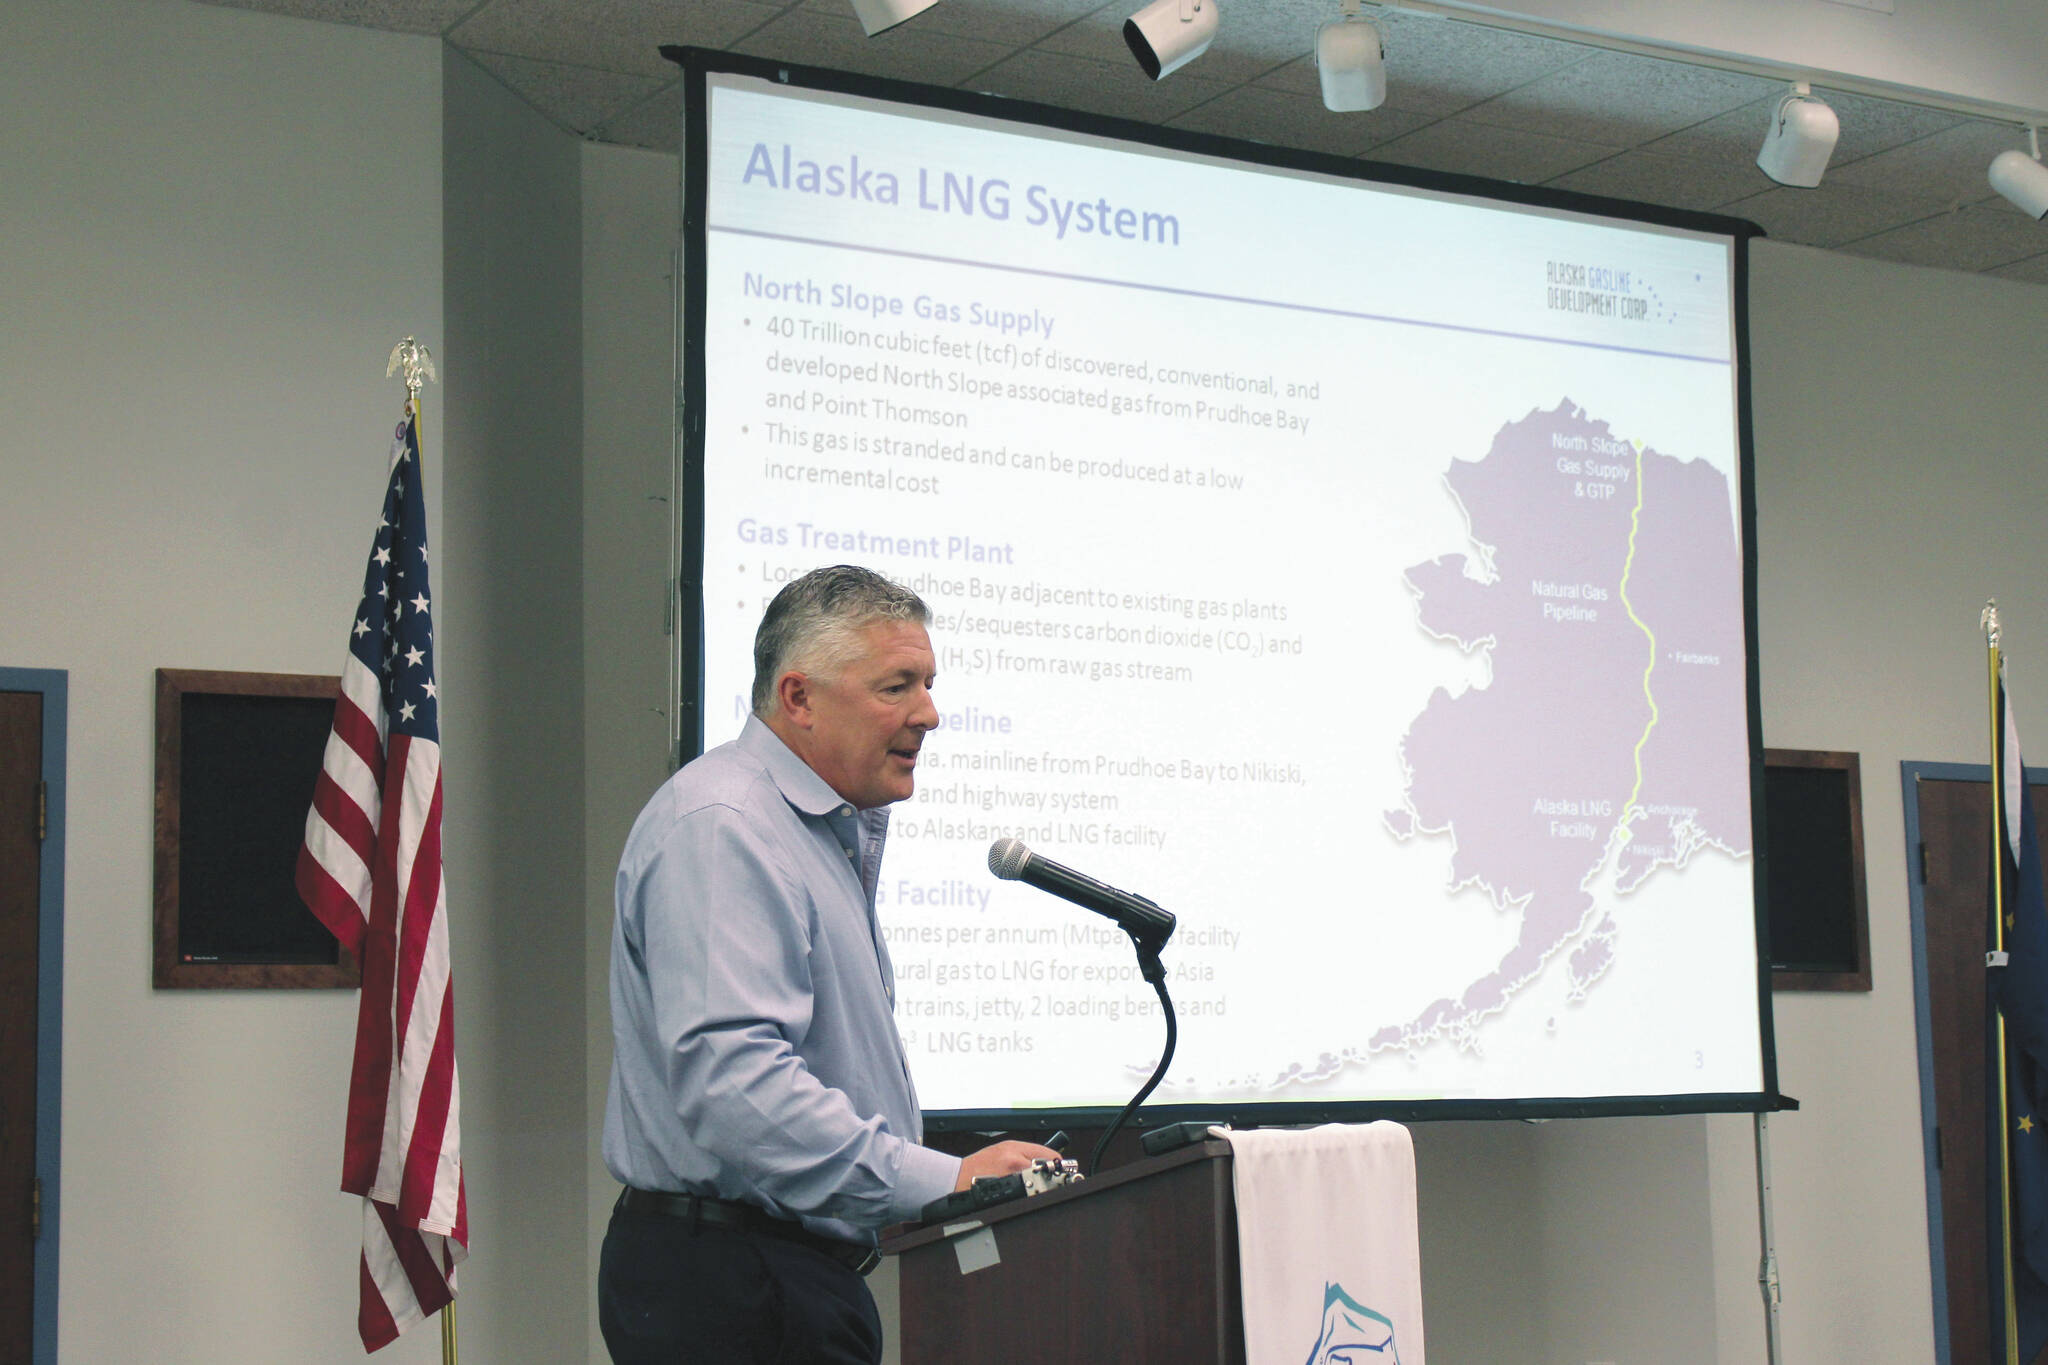 Ashlyn O’Hara / Peninsula Clarion file 
Alaska LNG Project Manager Brad Chastain presents information about the project during a luncheon at the Kenai Chamber Commerce and Visitor Center on July 6.